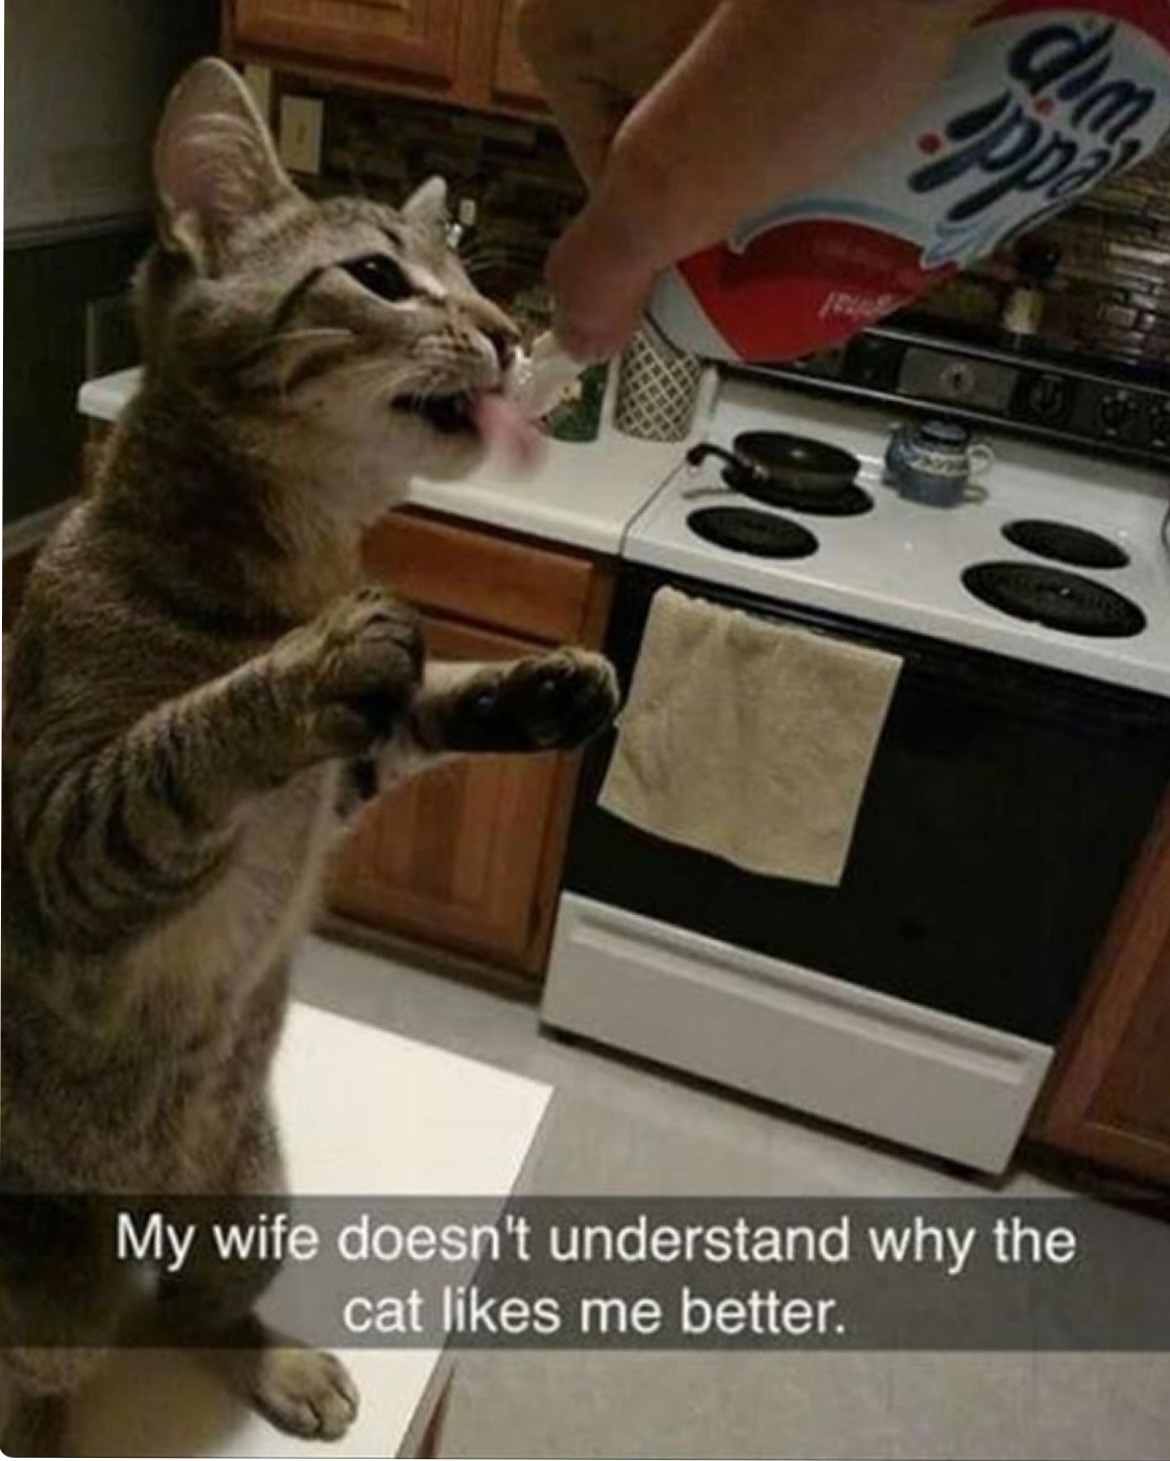 my wife doesn t understand why the cat likes me better - My wife doesn't understand why the cat me better.